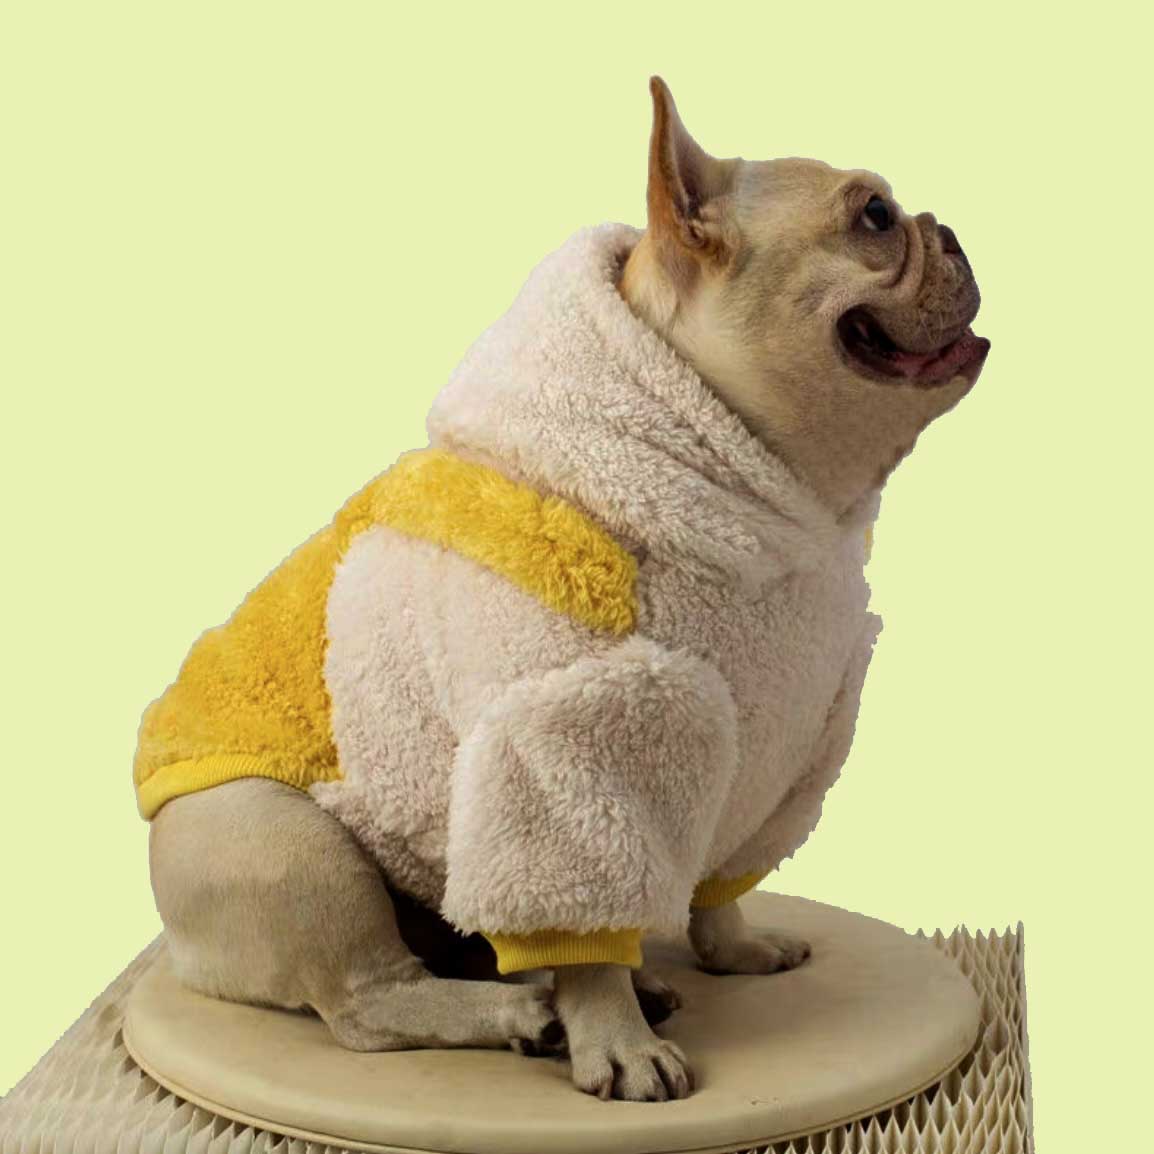 Spongebob Fluffy Fleece Teddy Hoodie for Cats and Dogs